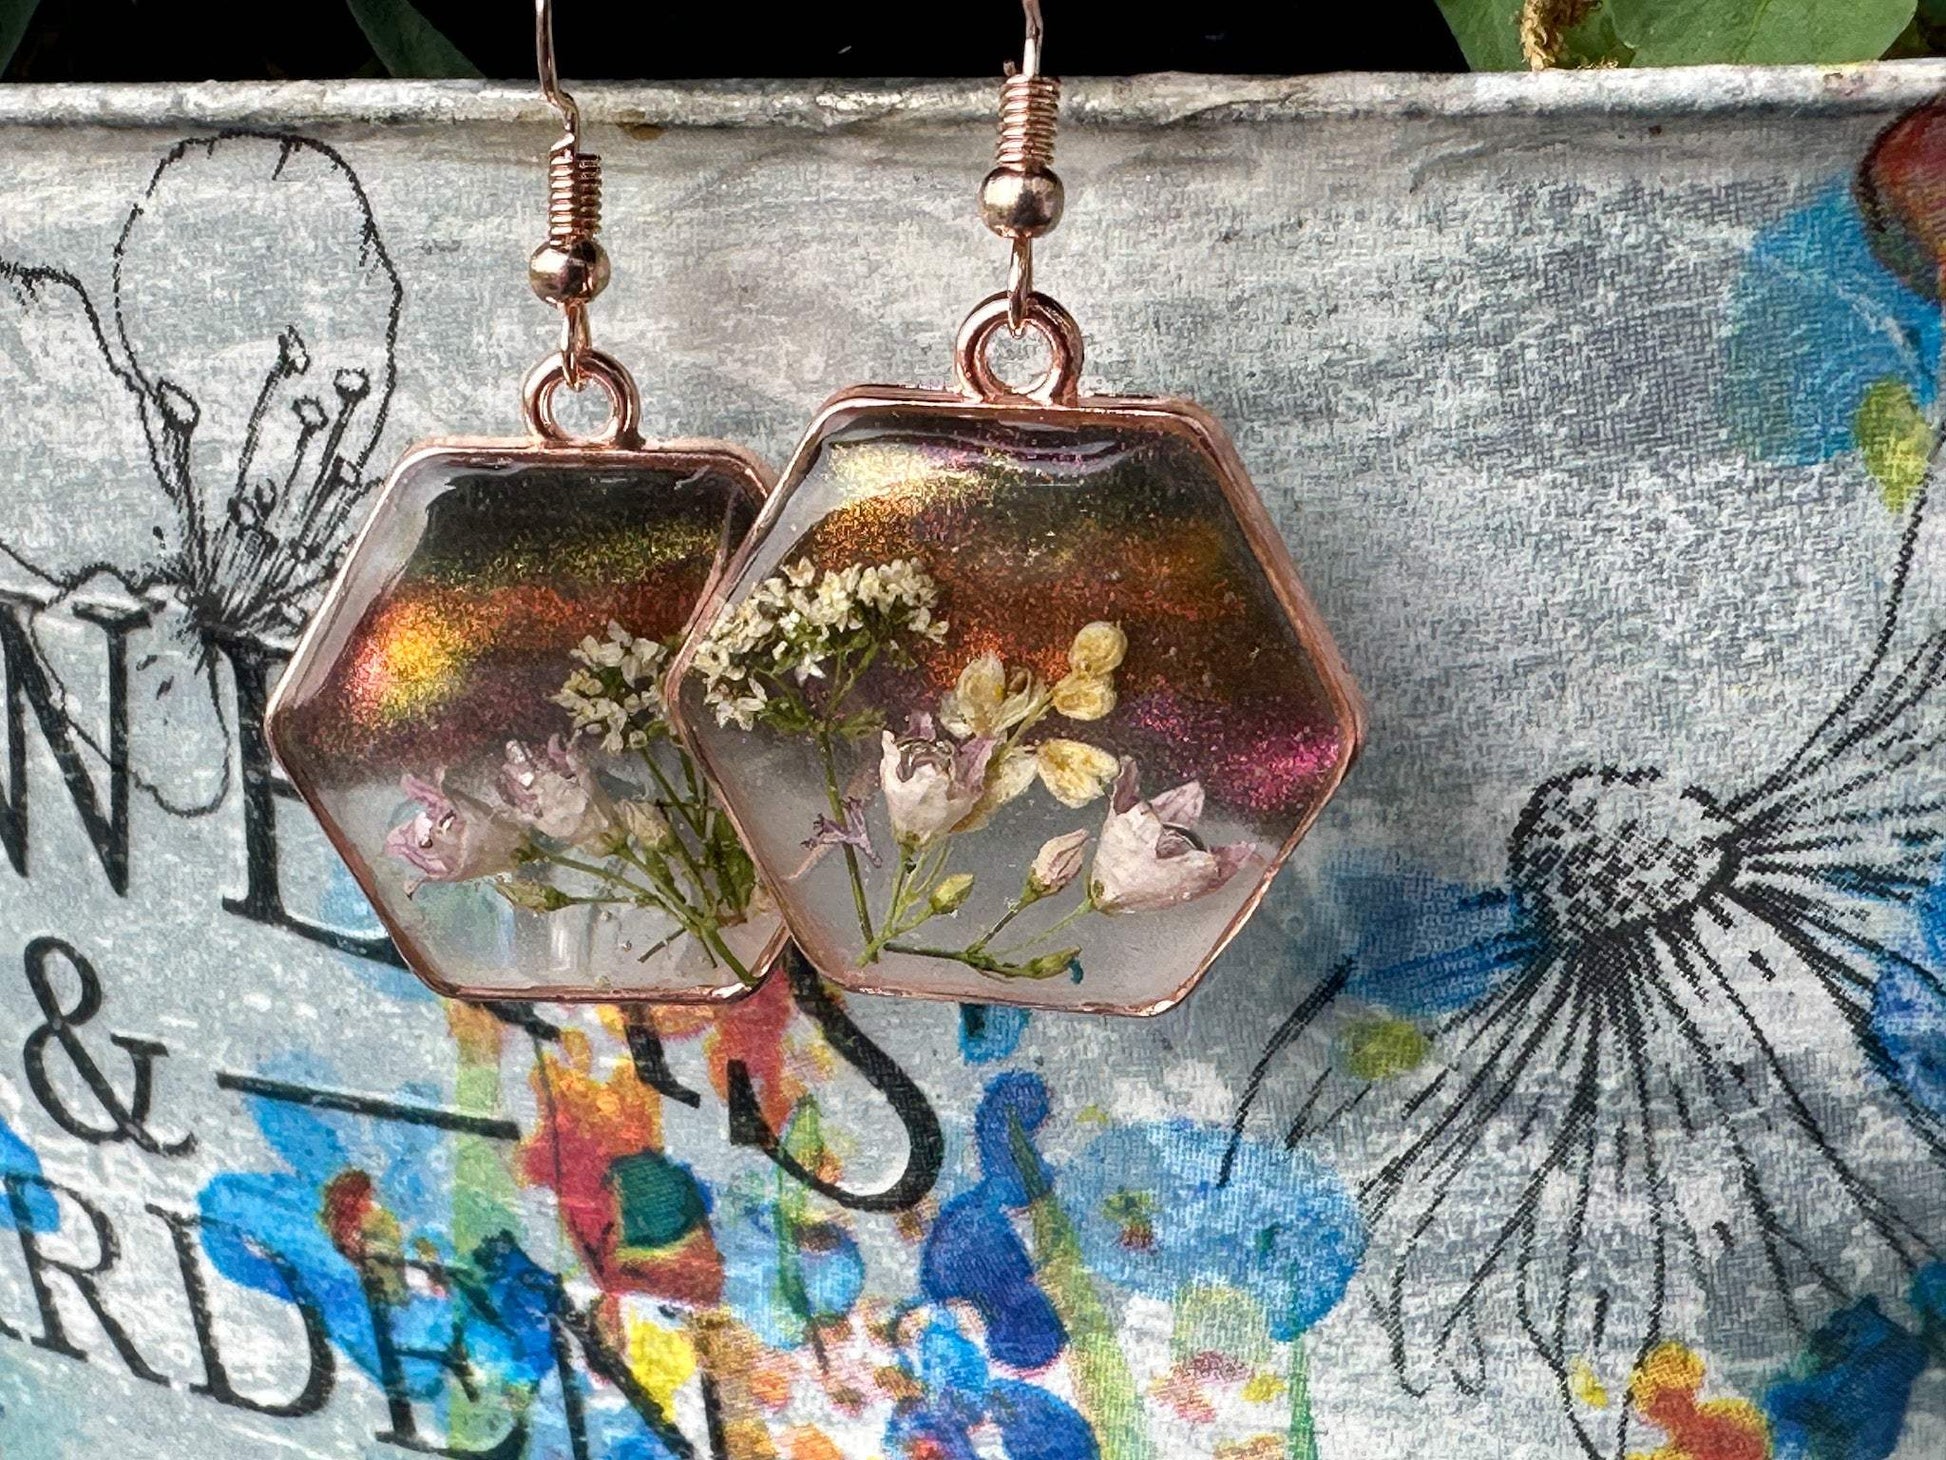 Magical Garden Whimsical Earring Set -Handmade with Real Dried Flowers